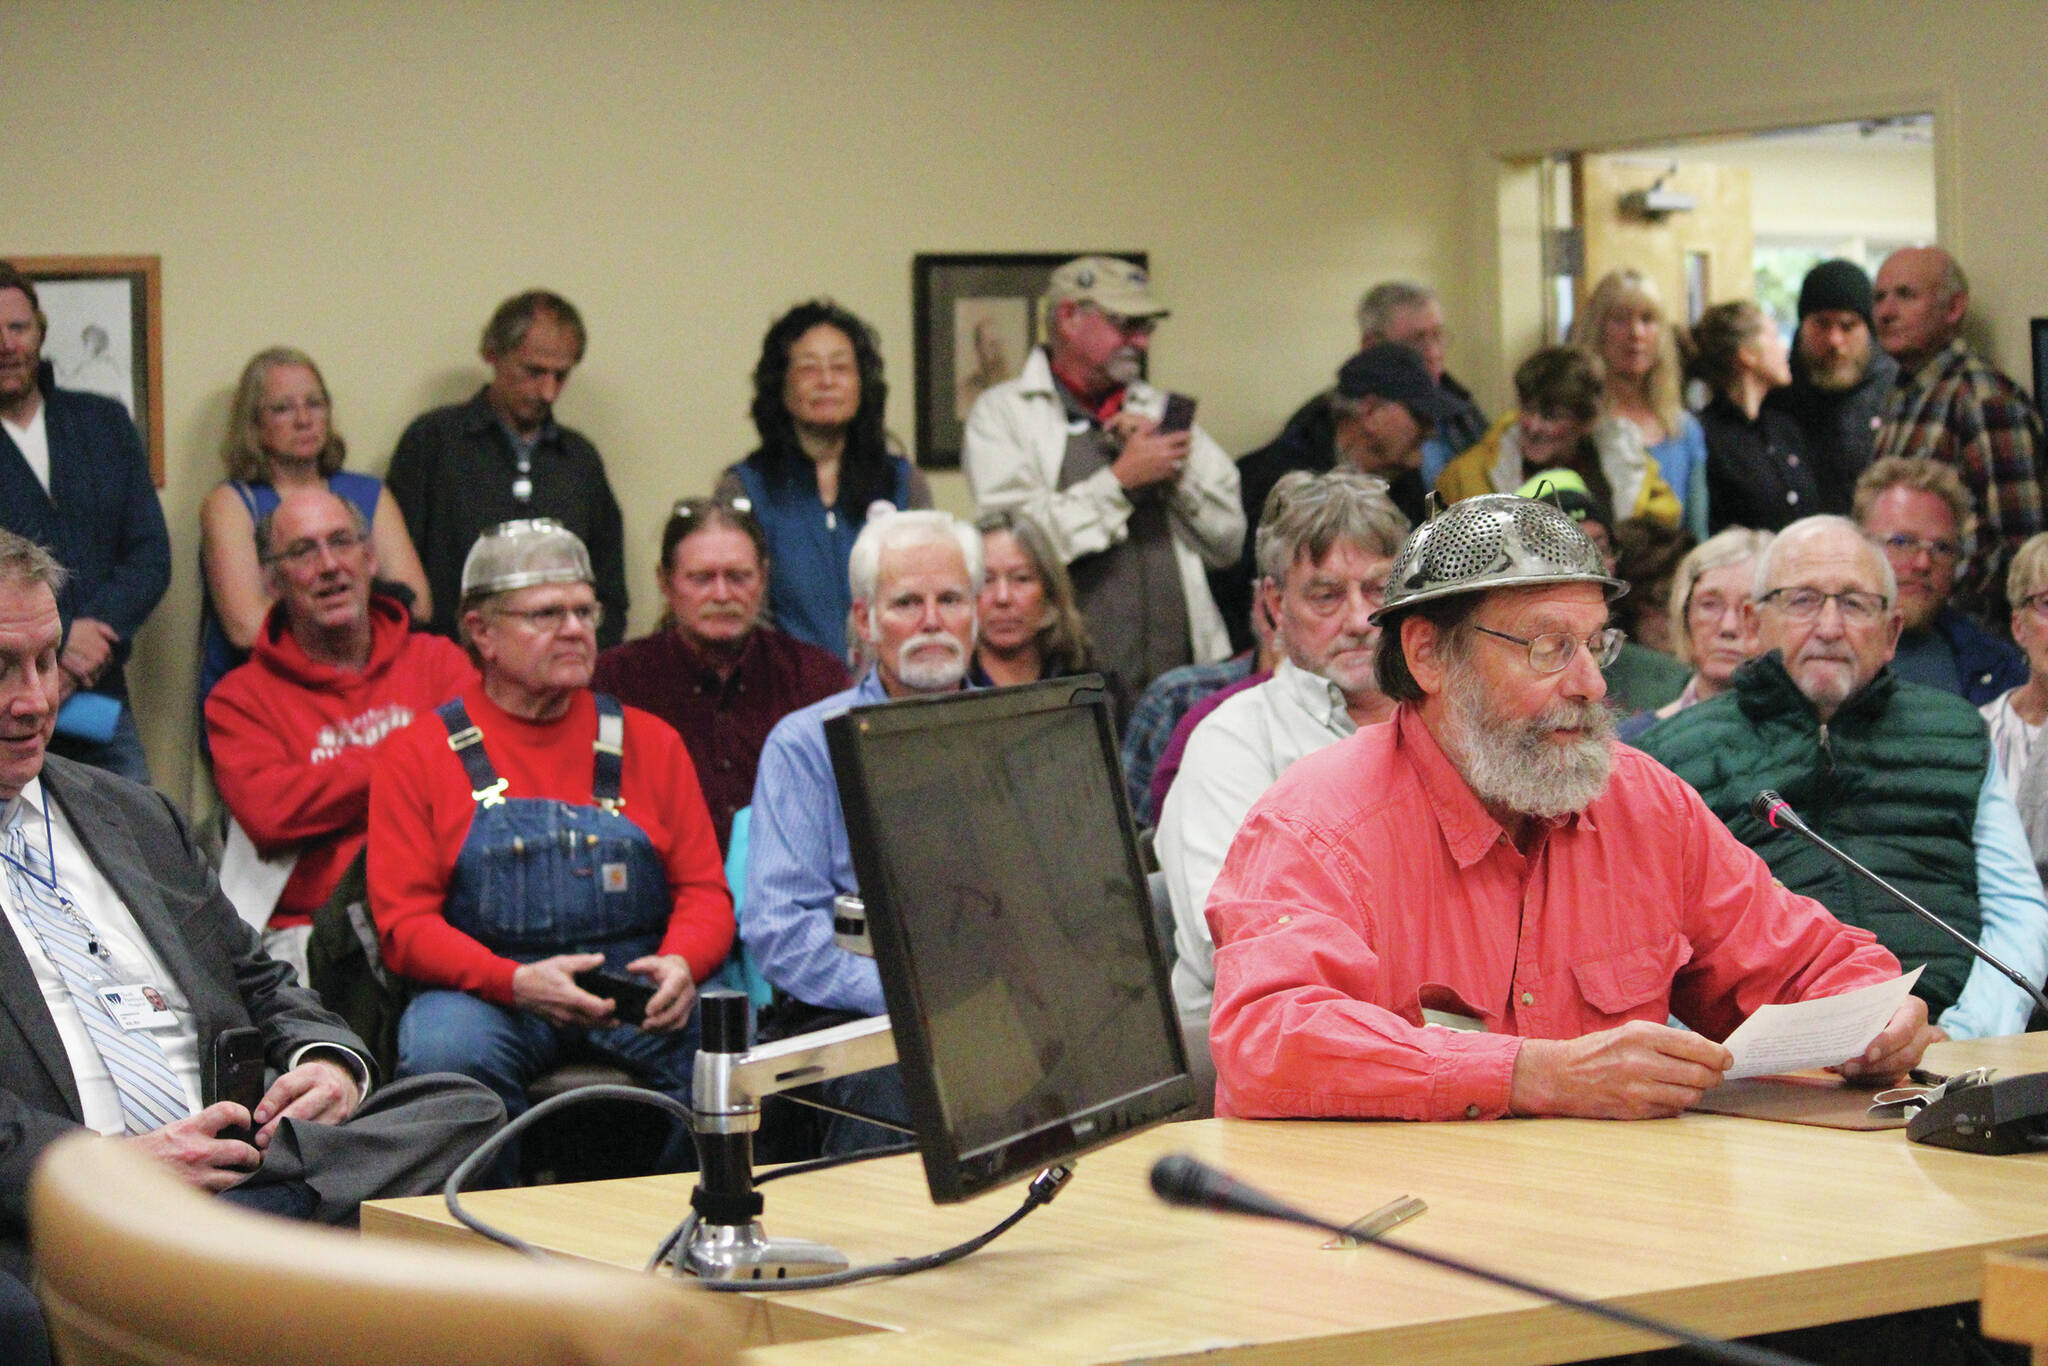 Frtiz Creek area resident Barrett Fletcher gives the invocation before a Tuesday, Sept. 17, 2019 Kenai Peninsula Borough Assembly meeting as a representative of the Church of the Flying Spaghetti Monster at Homer City Hall in Homer, Alaska. (Photo by Megan Pacer/Homer News)